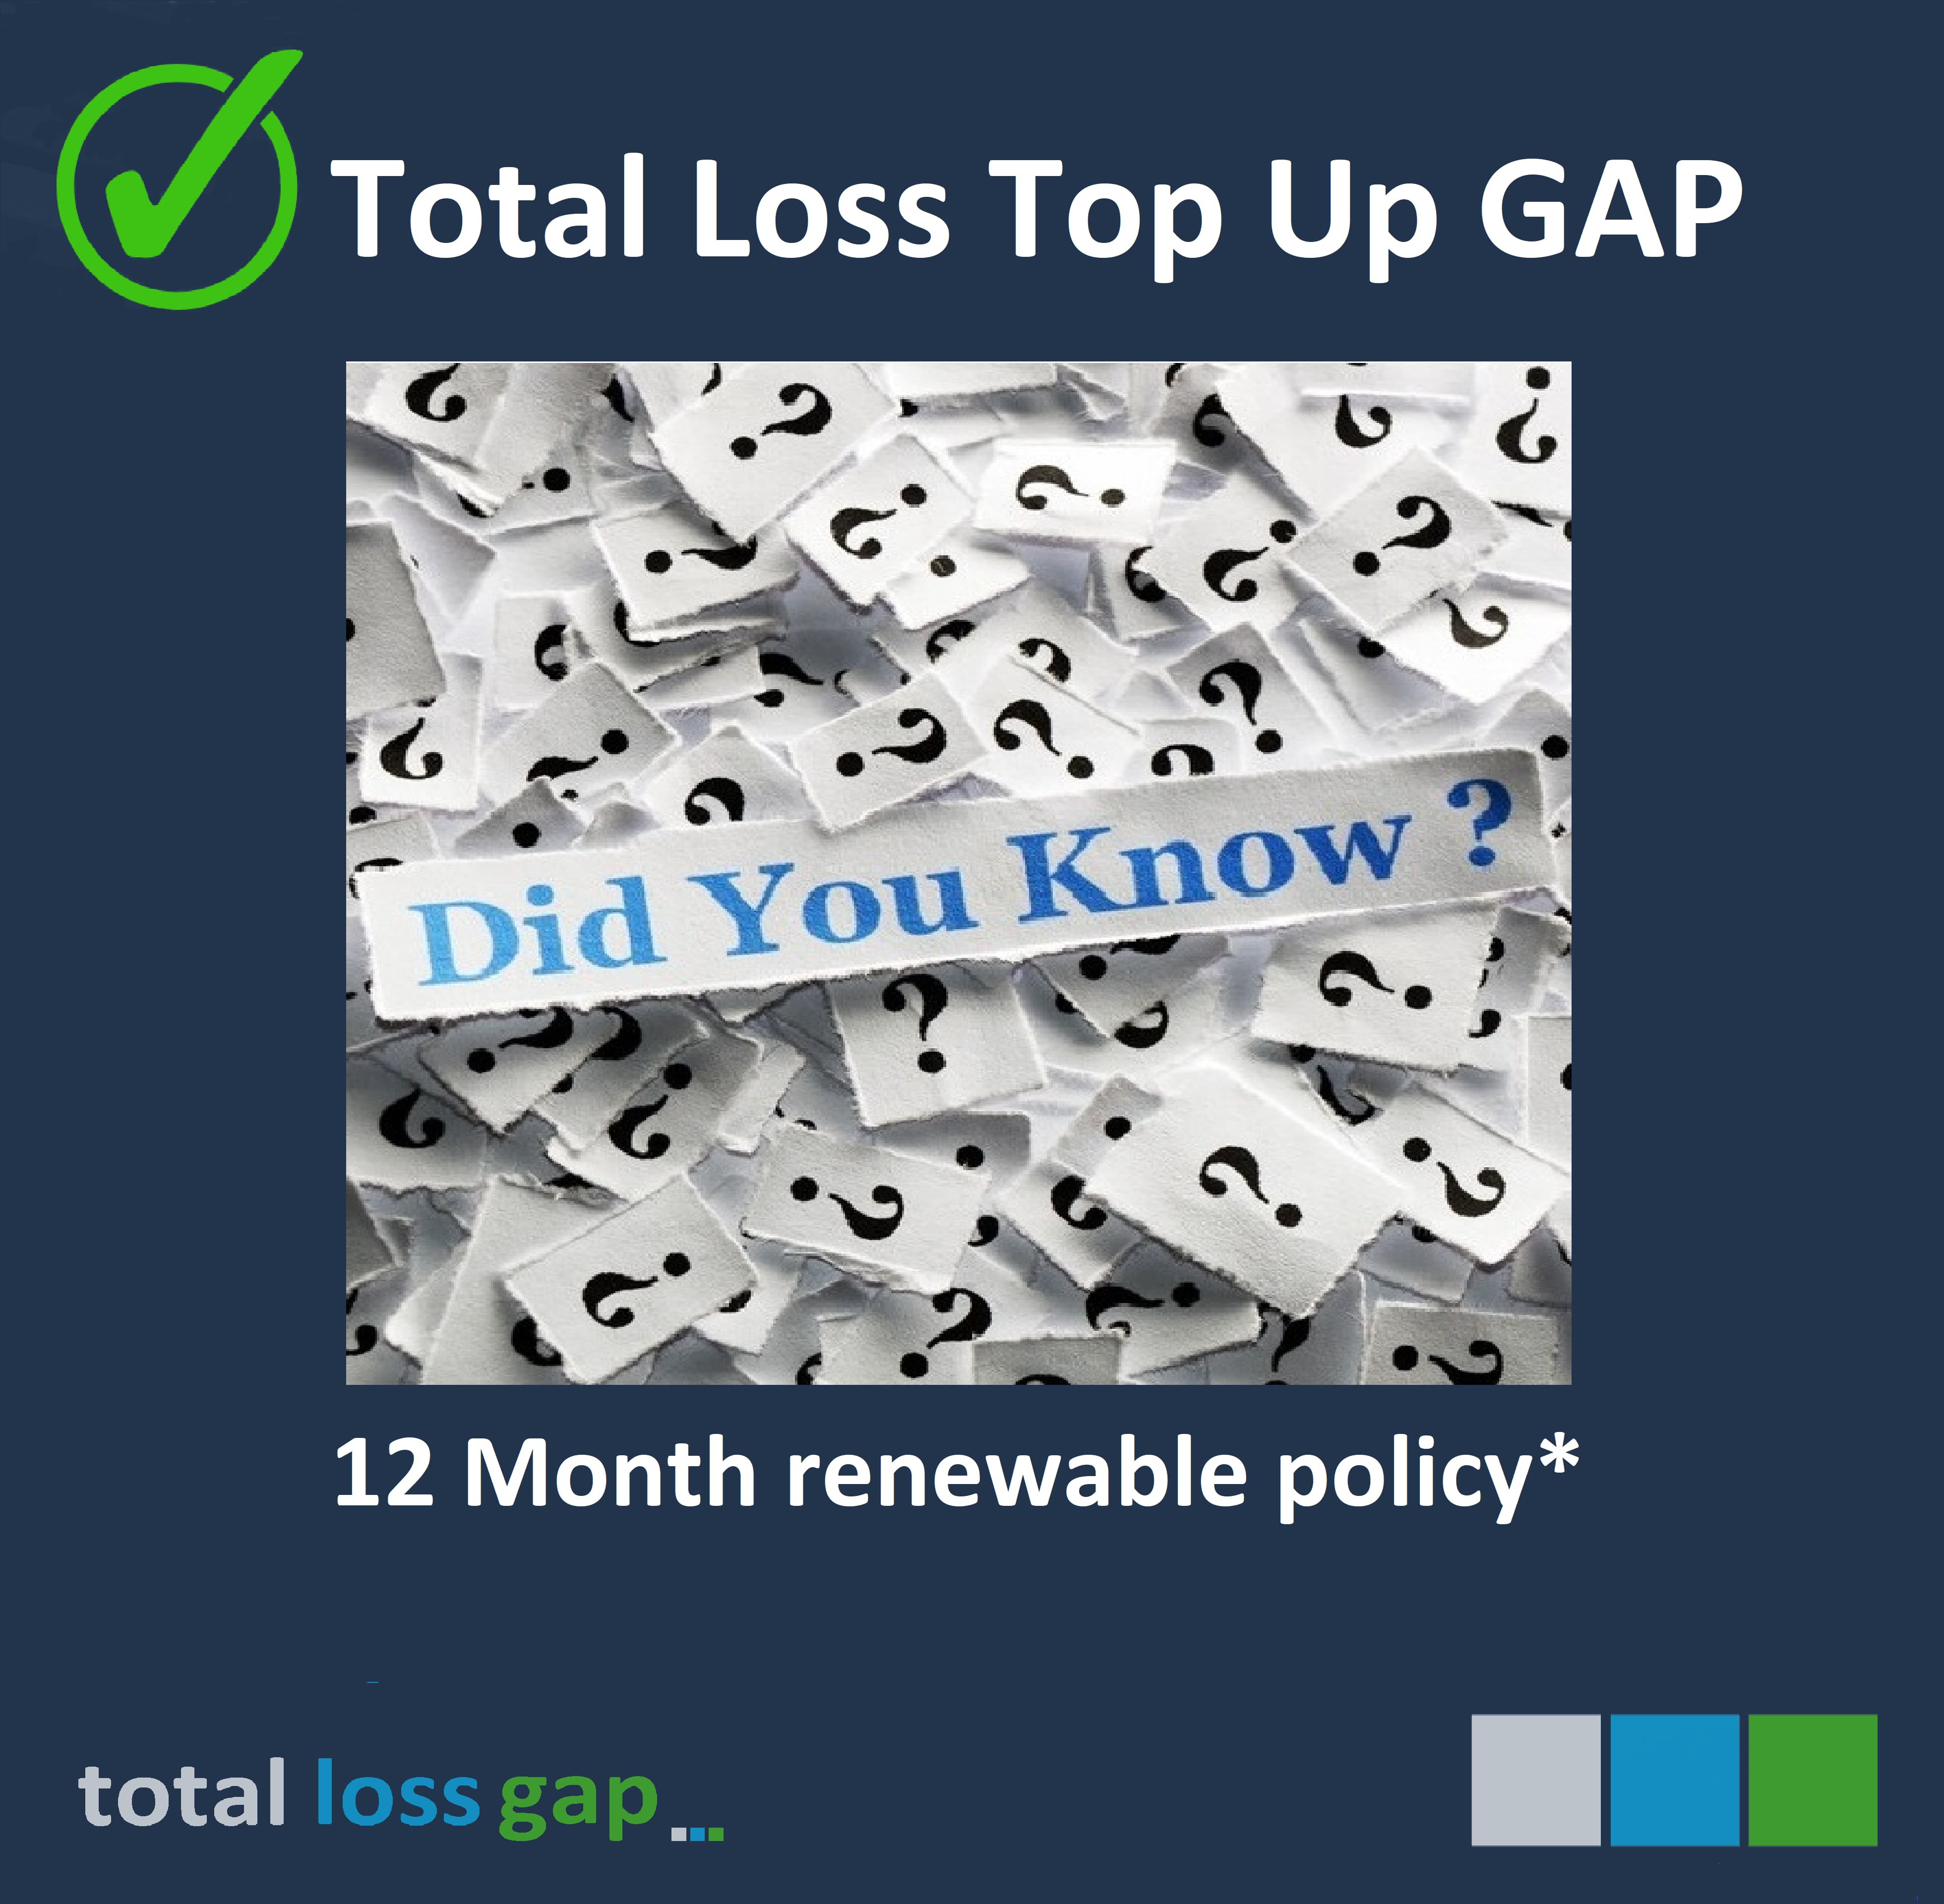 Top up Gap Insurance is a 12 month renewable policy